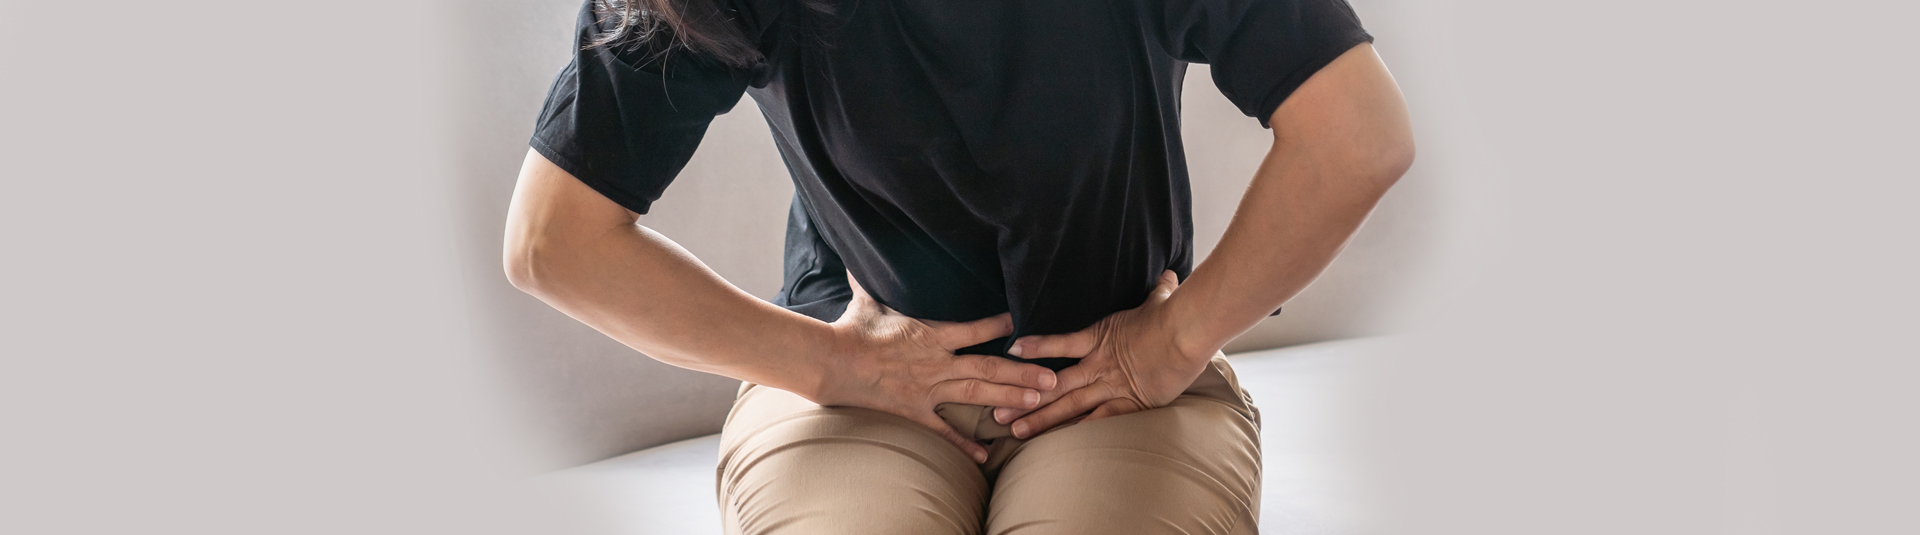  All That You Need To Know About Abdominal Pain